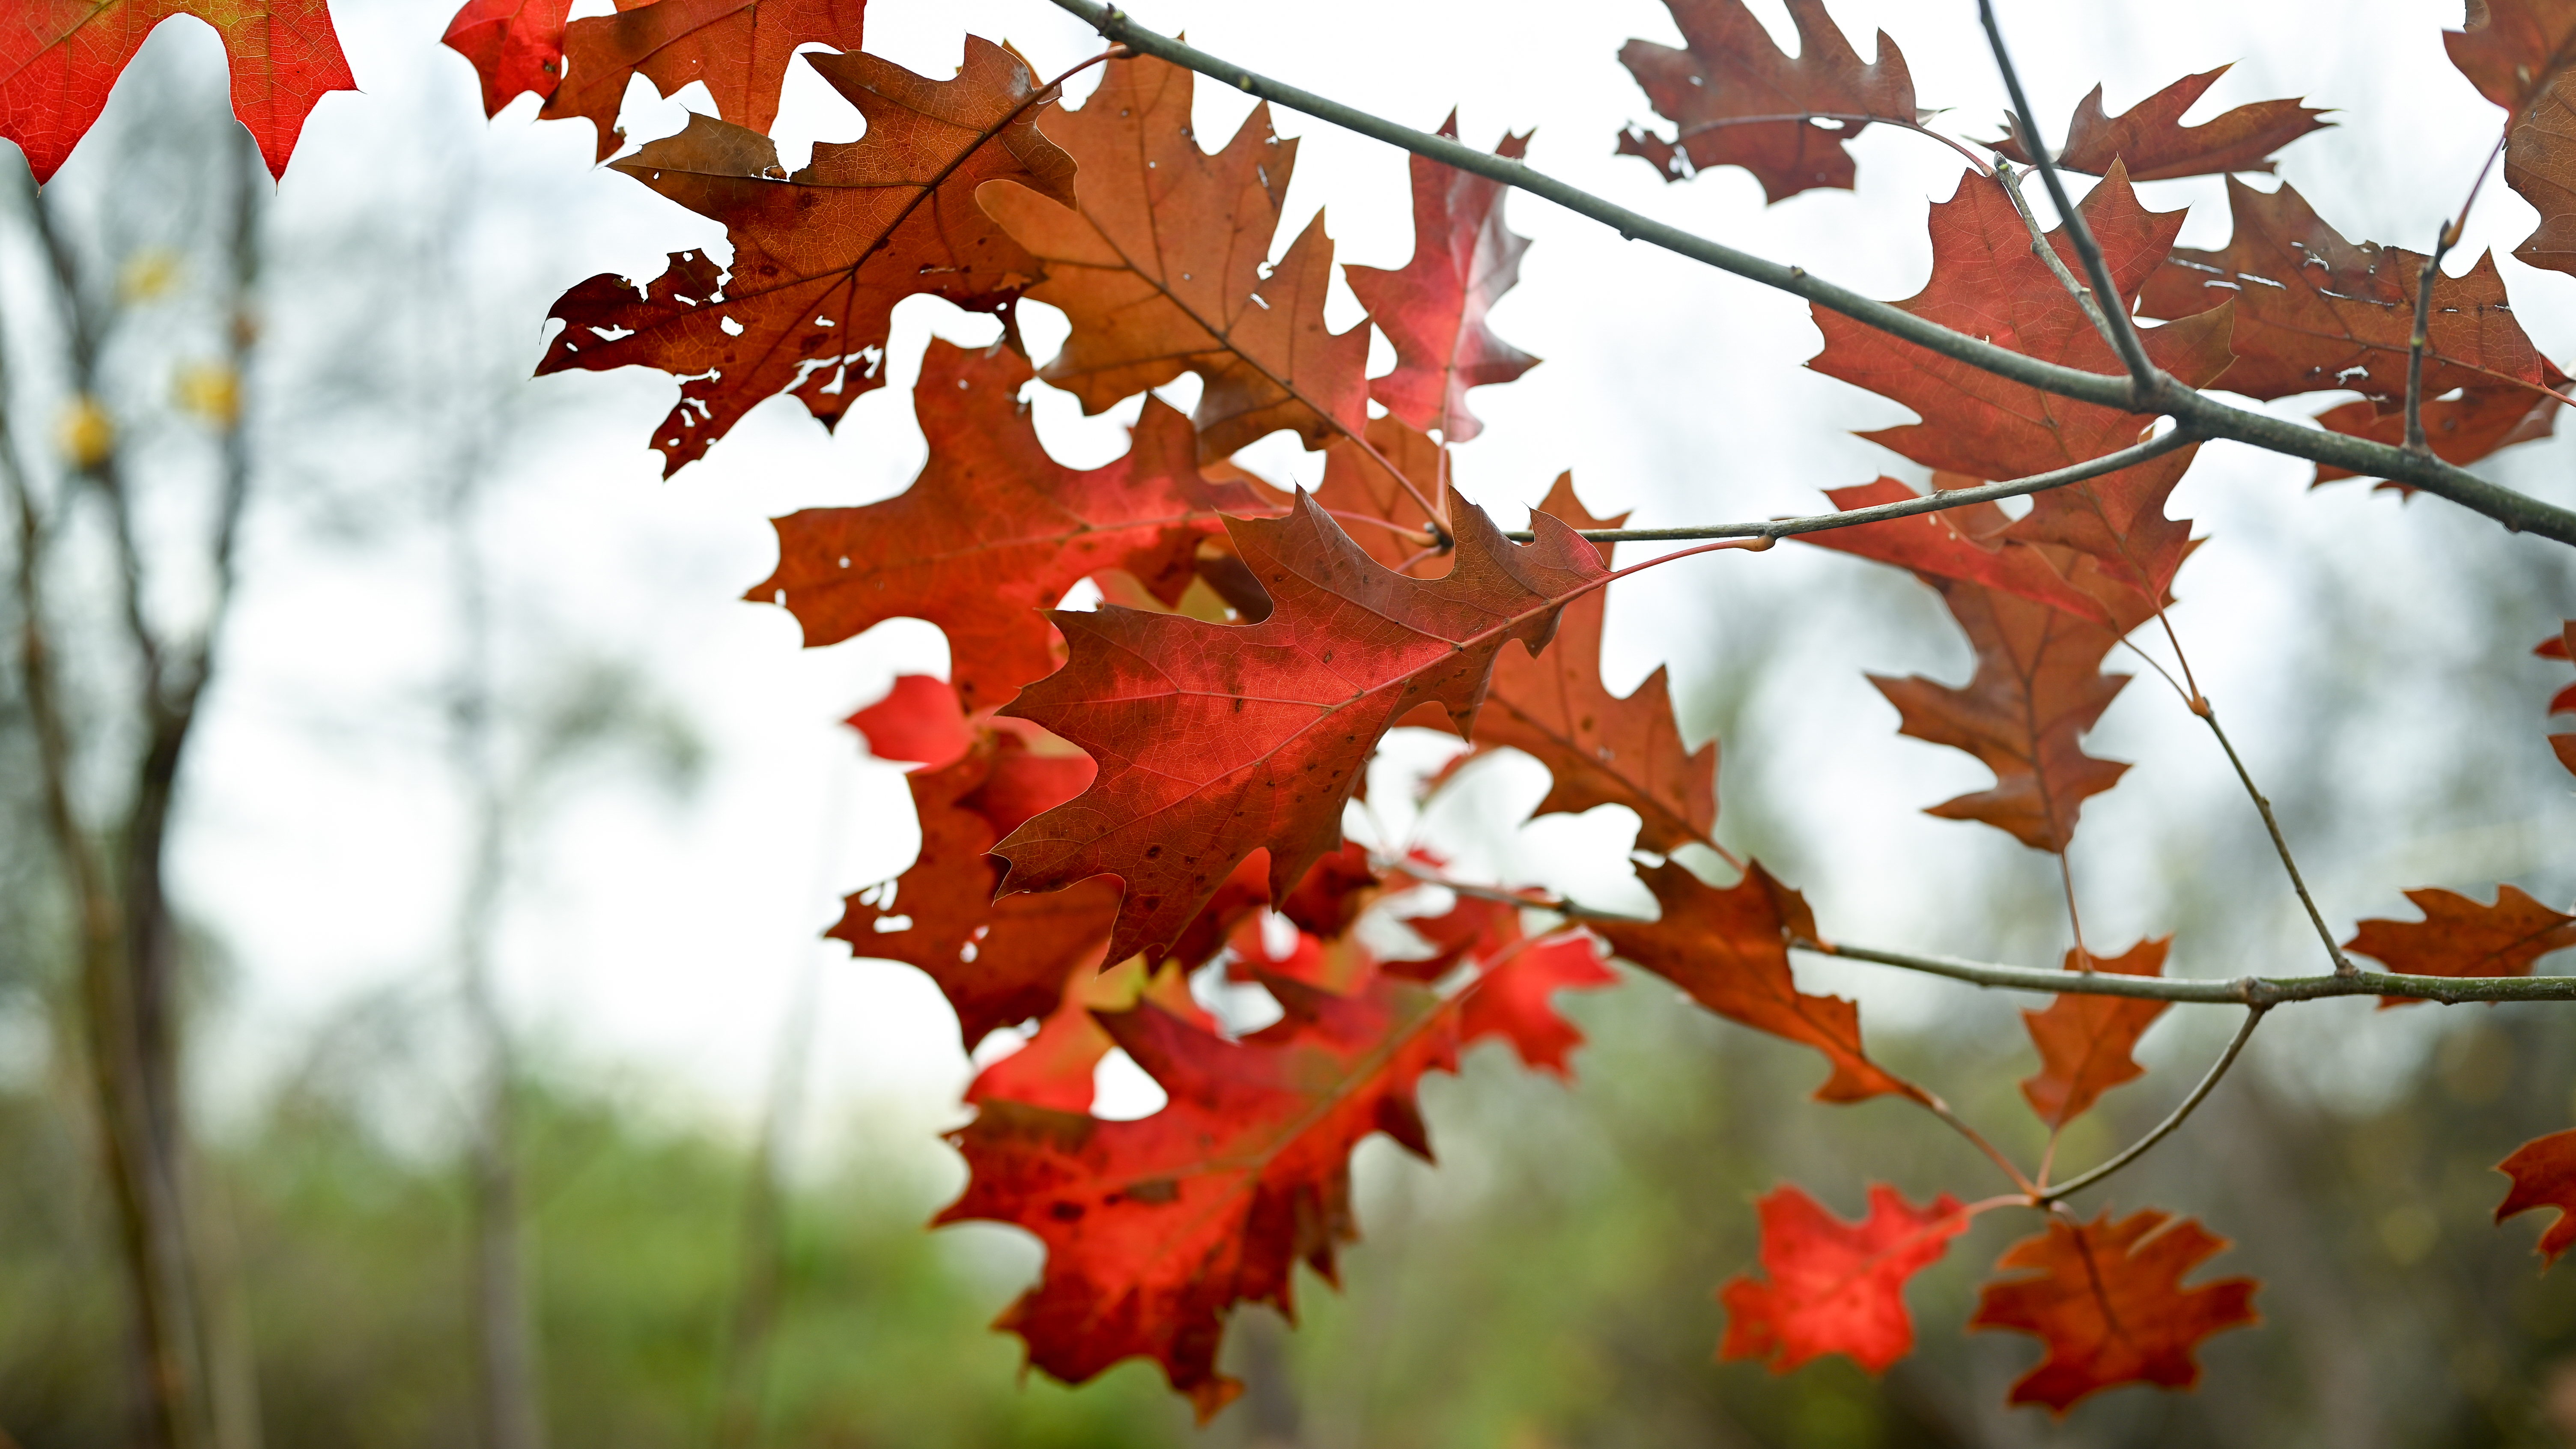 Red Leaves Trees Nature Fall Photography Outdoors 6016x3384